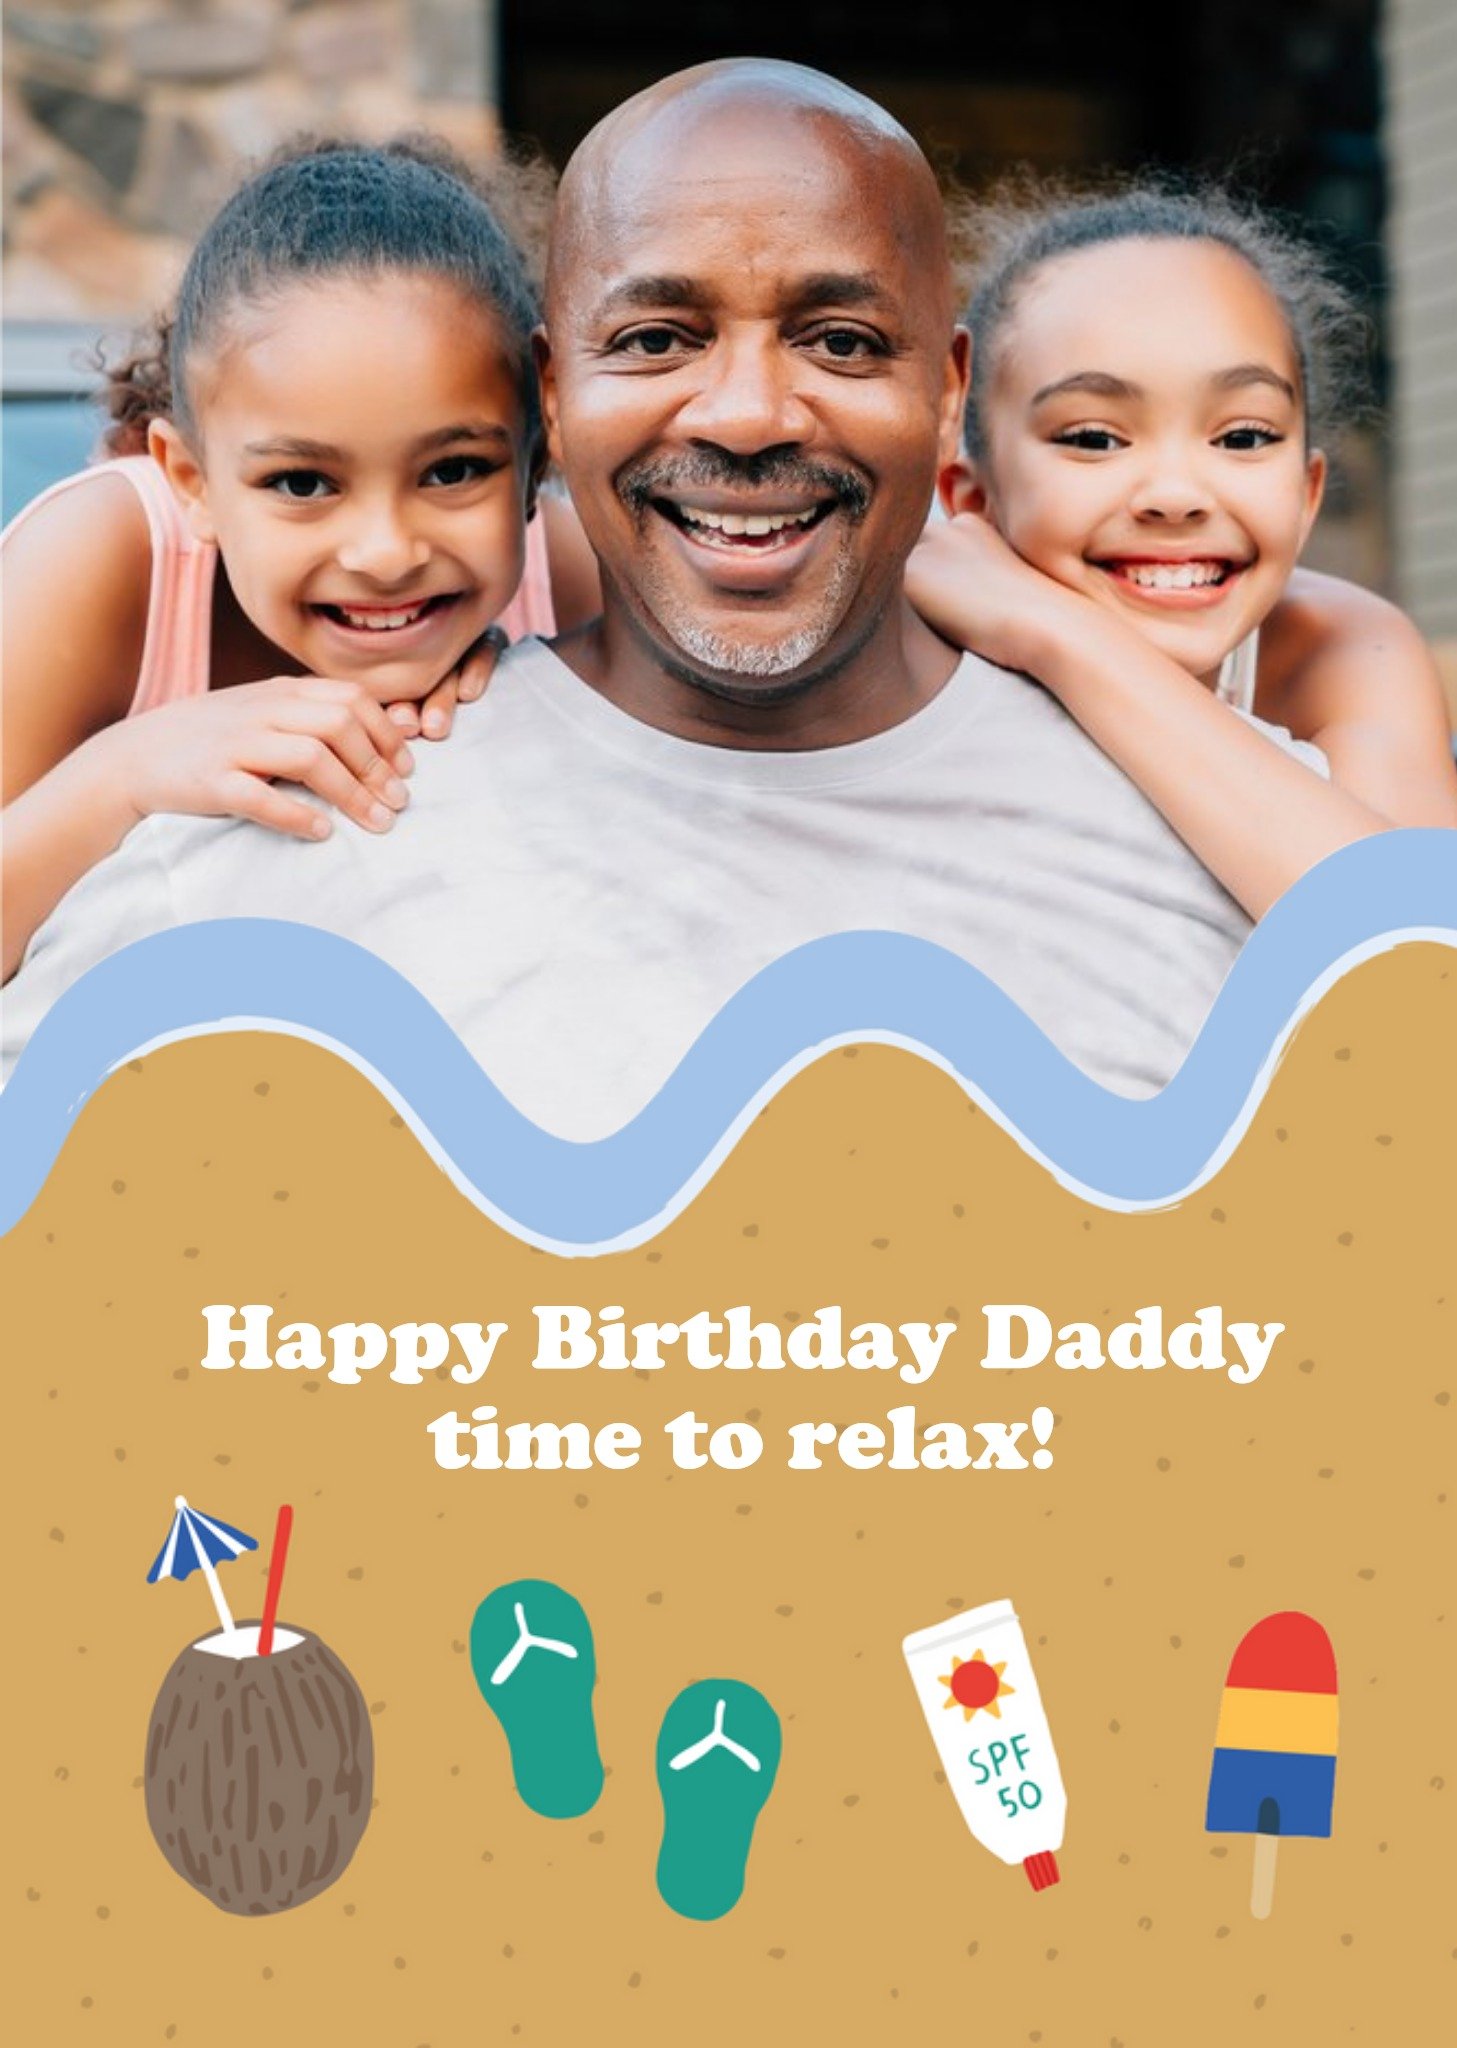 Moonpig Happy Birthday Daddy Time To Relax Photo Upload Card Ecard